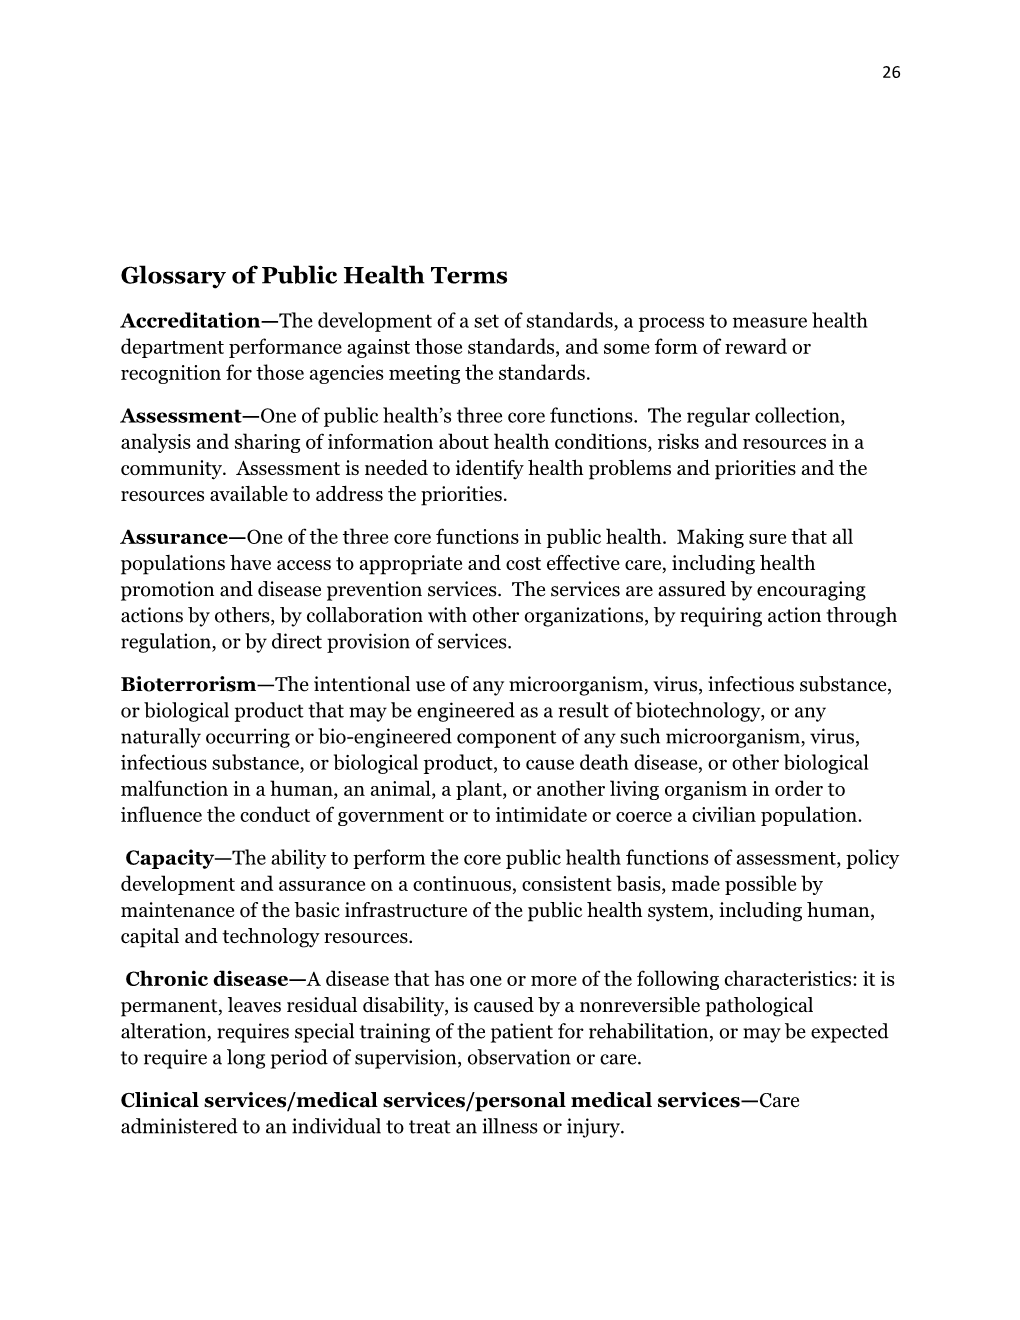 Glossary of Public Health Terms